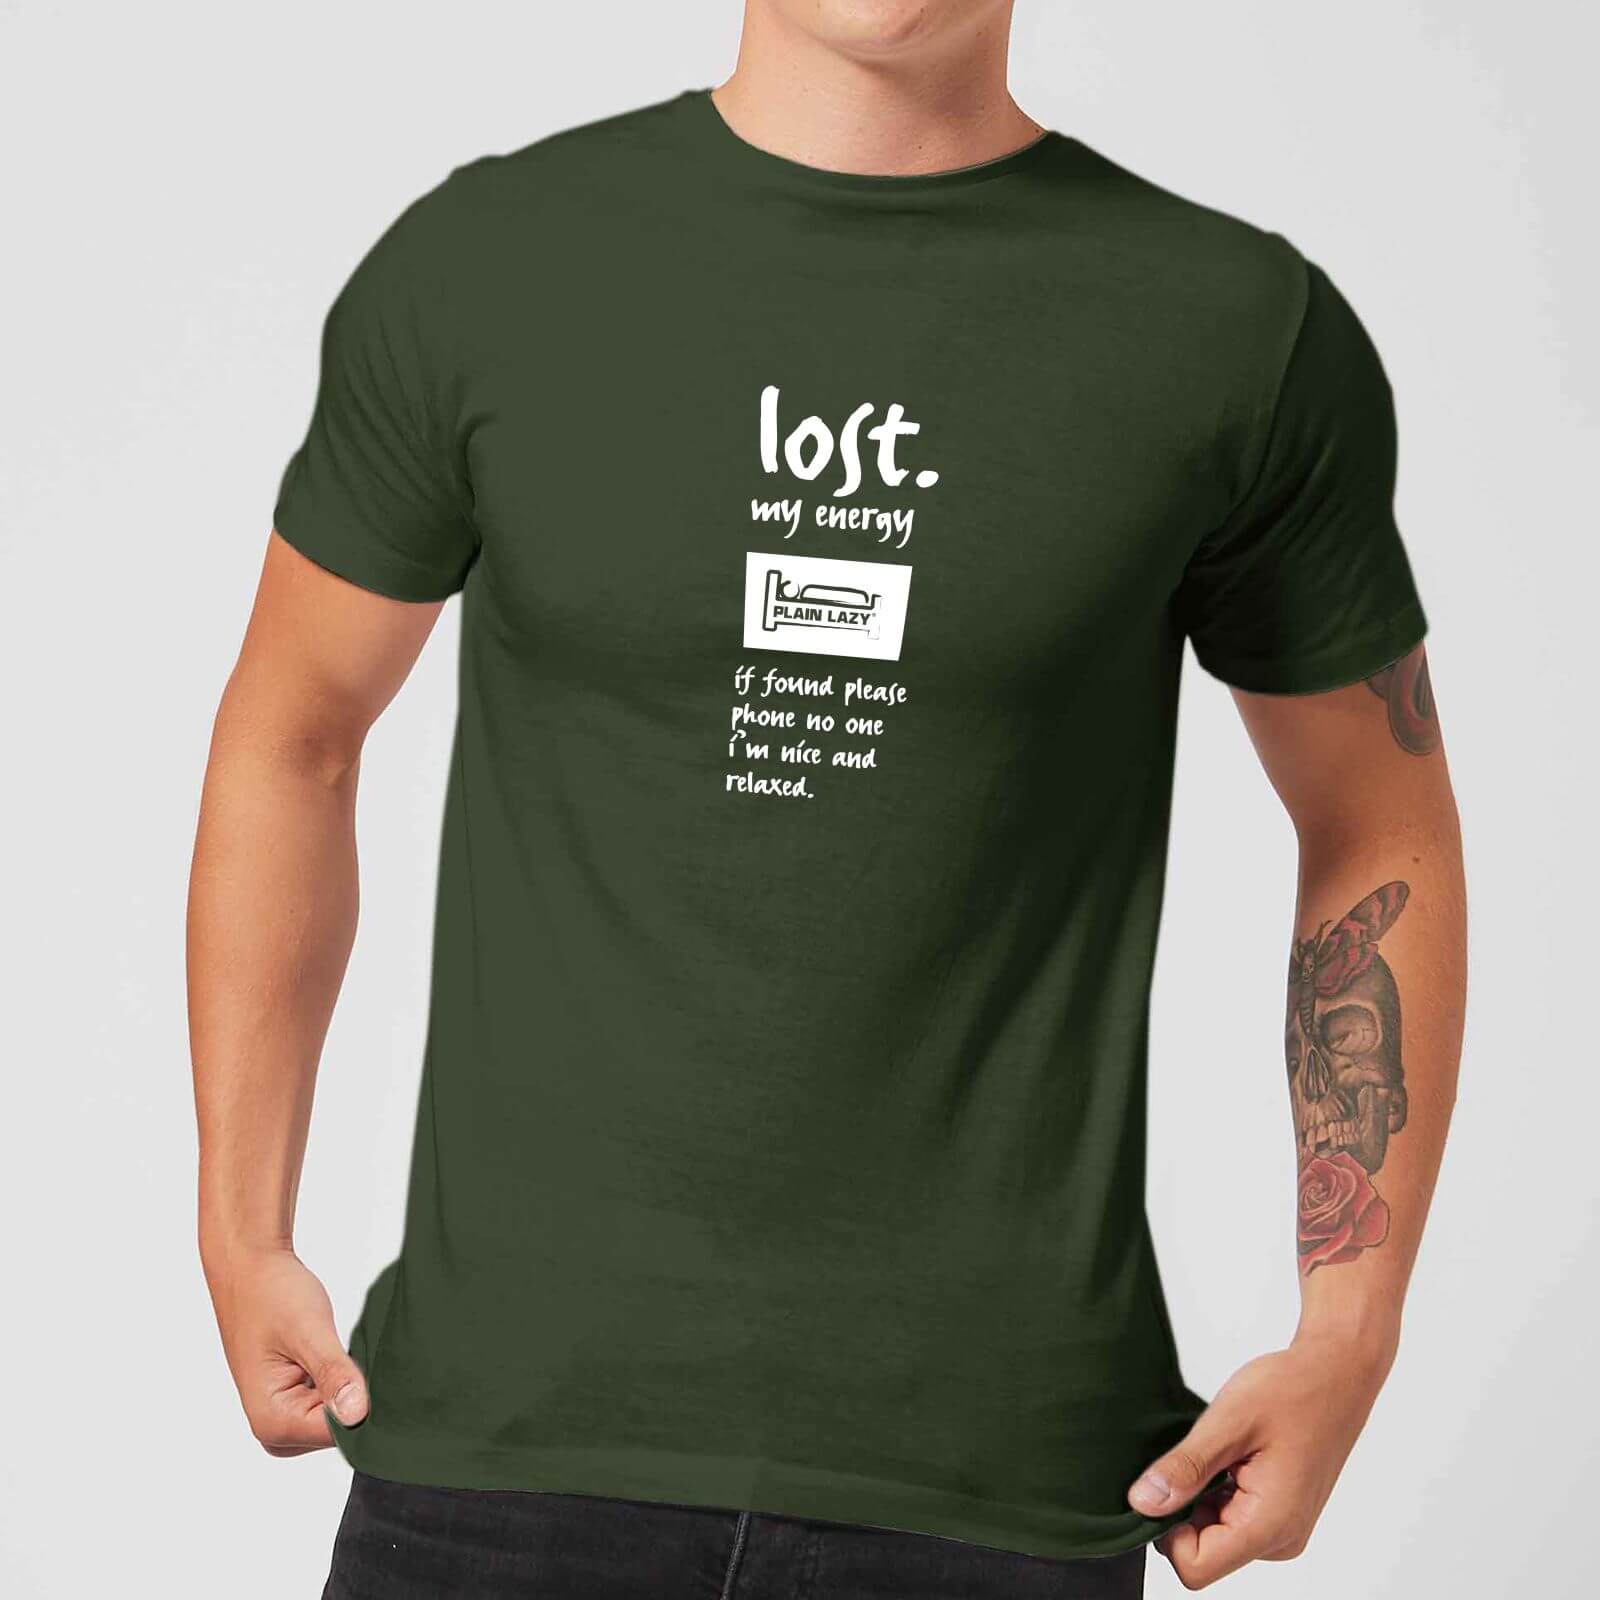 Plain Lazy Lost My Energy Men's T-Shirt - Forest Green - XS - Forest Green